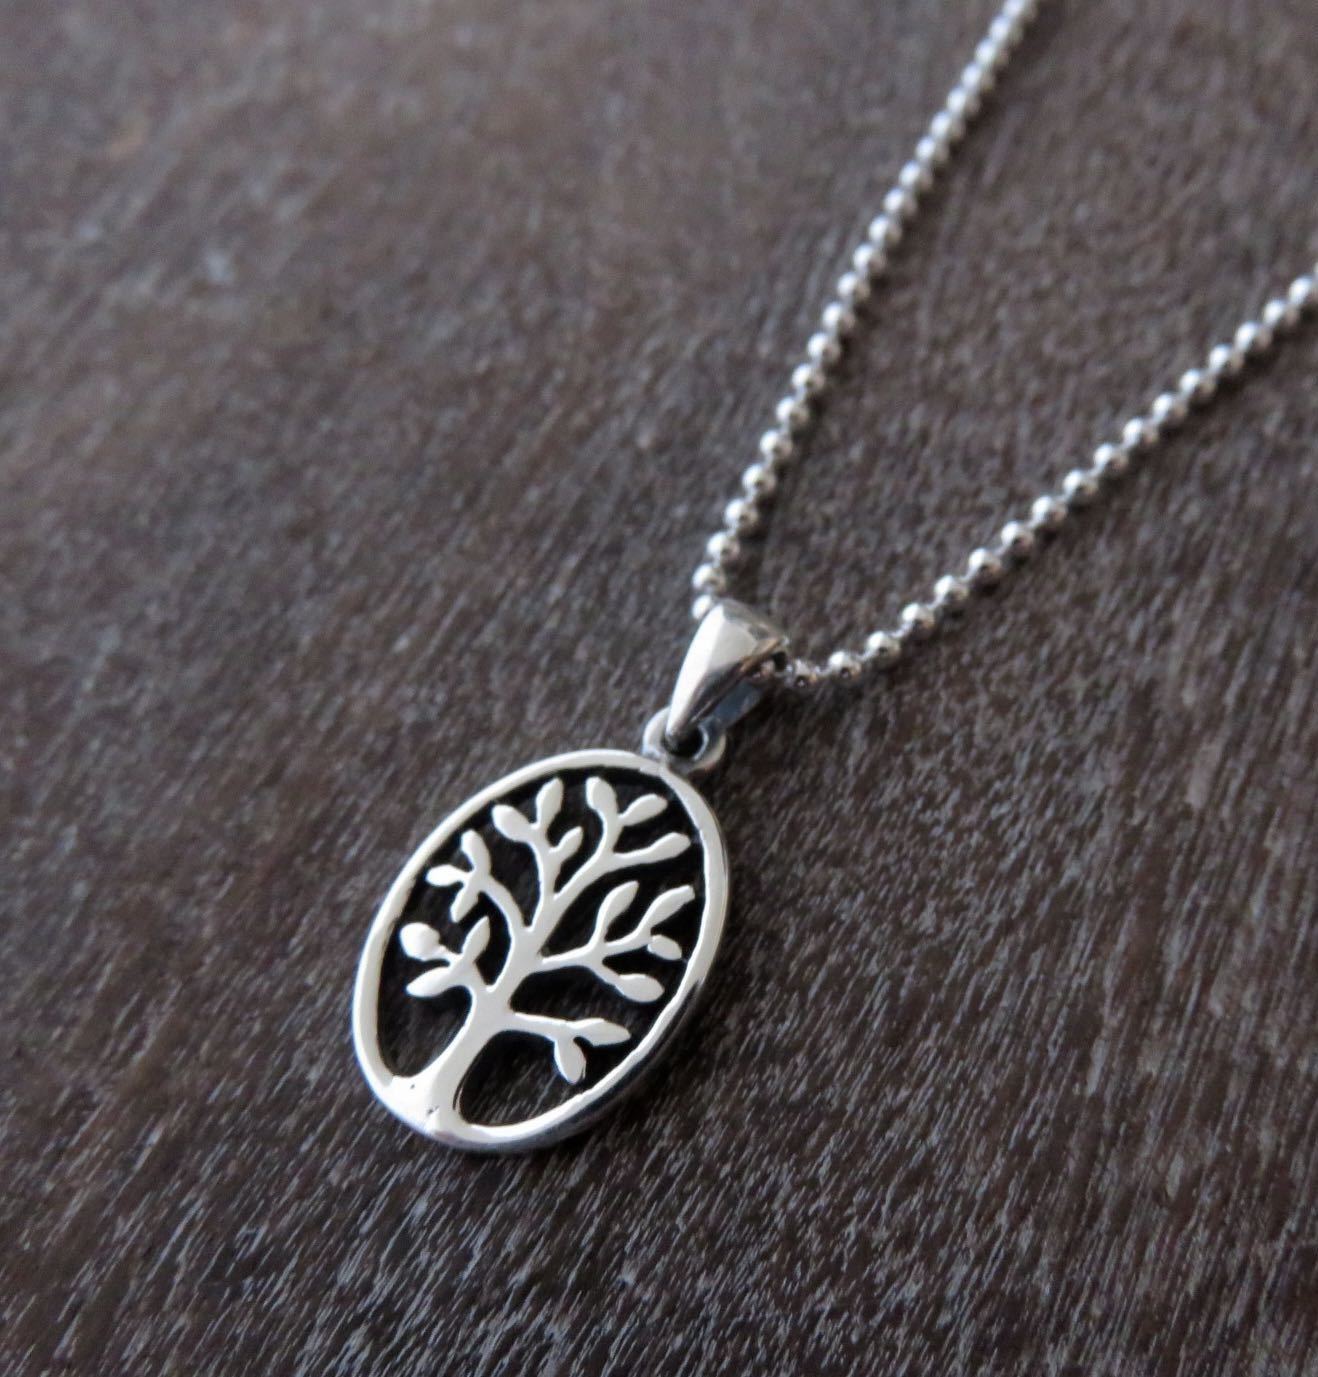 Oval pendant with the motif of the tree of life made of silver 